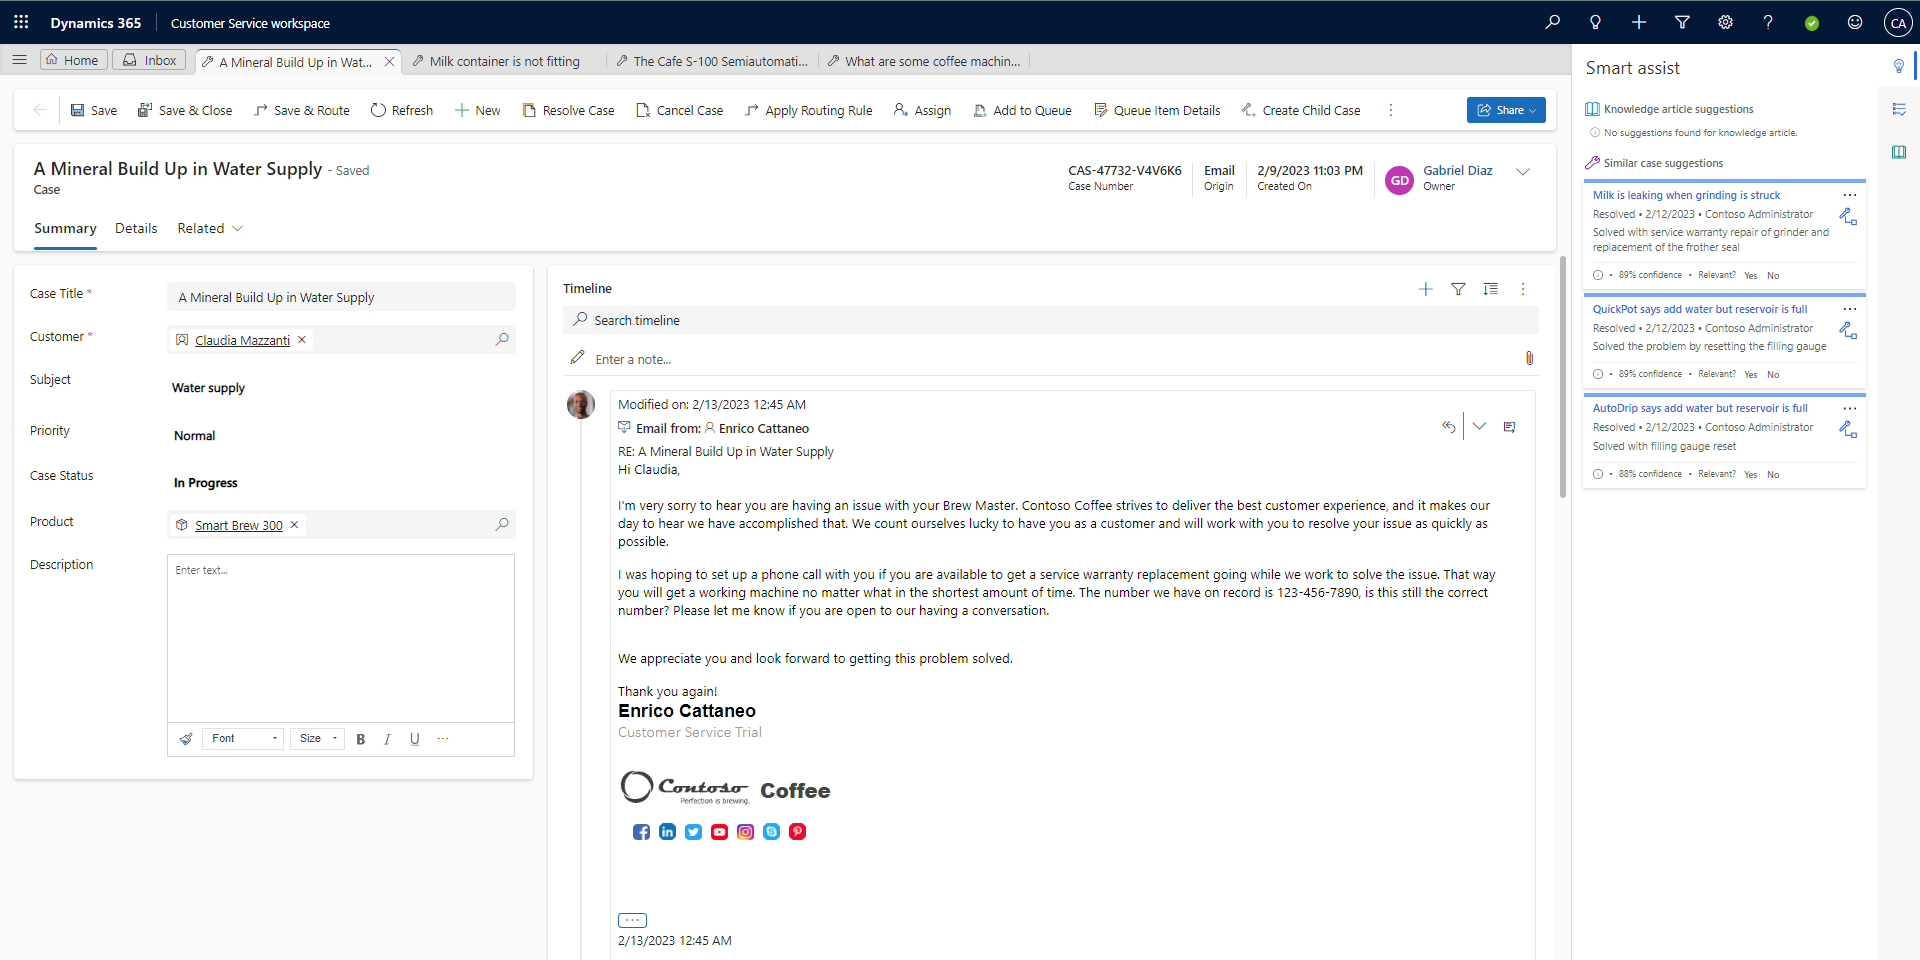 Screenshot of the enhanced multisession Customer Service workspace